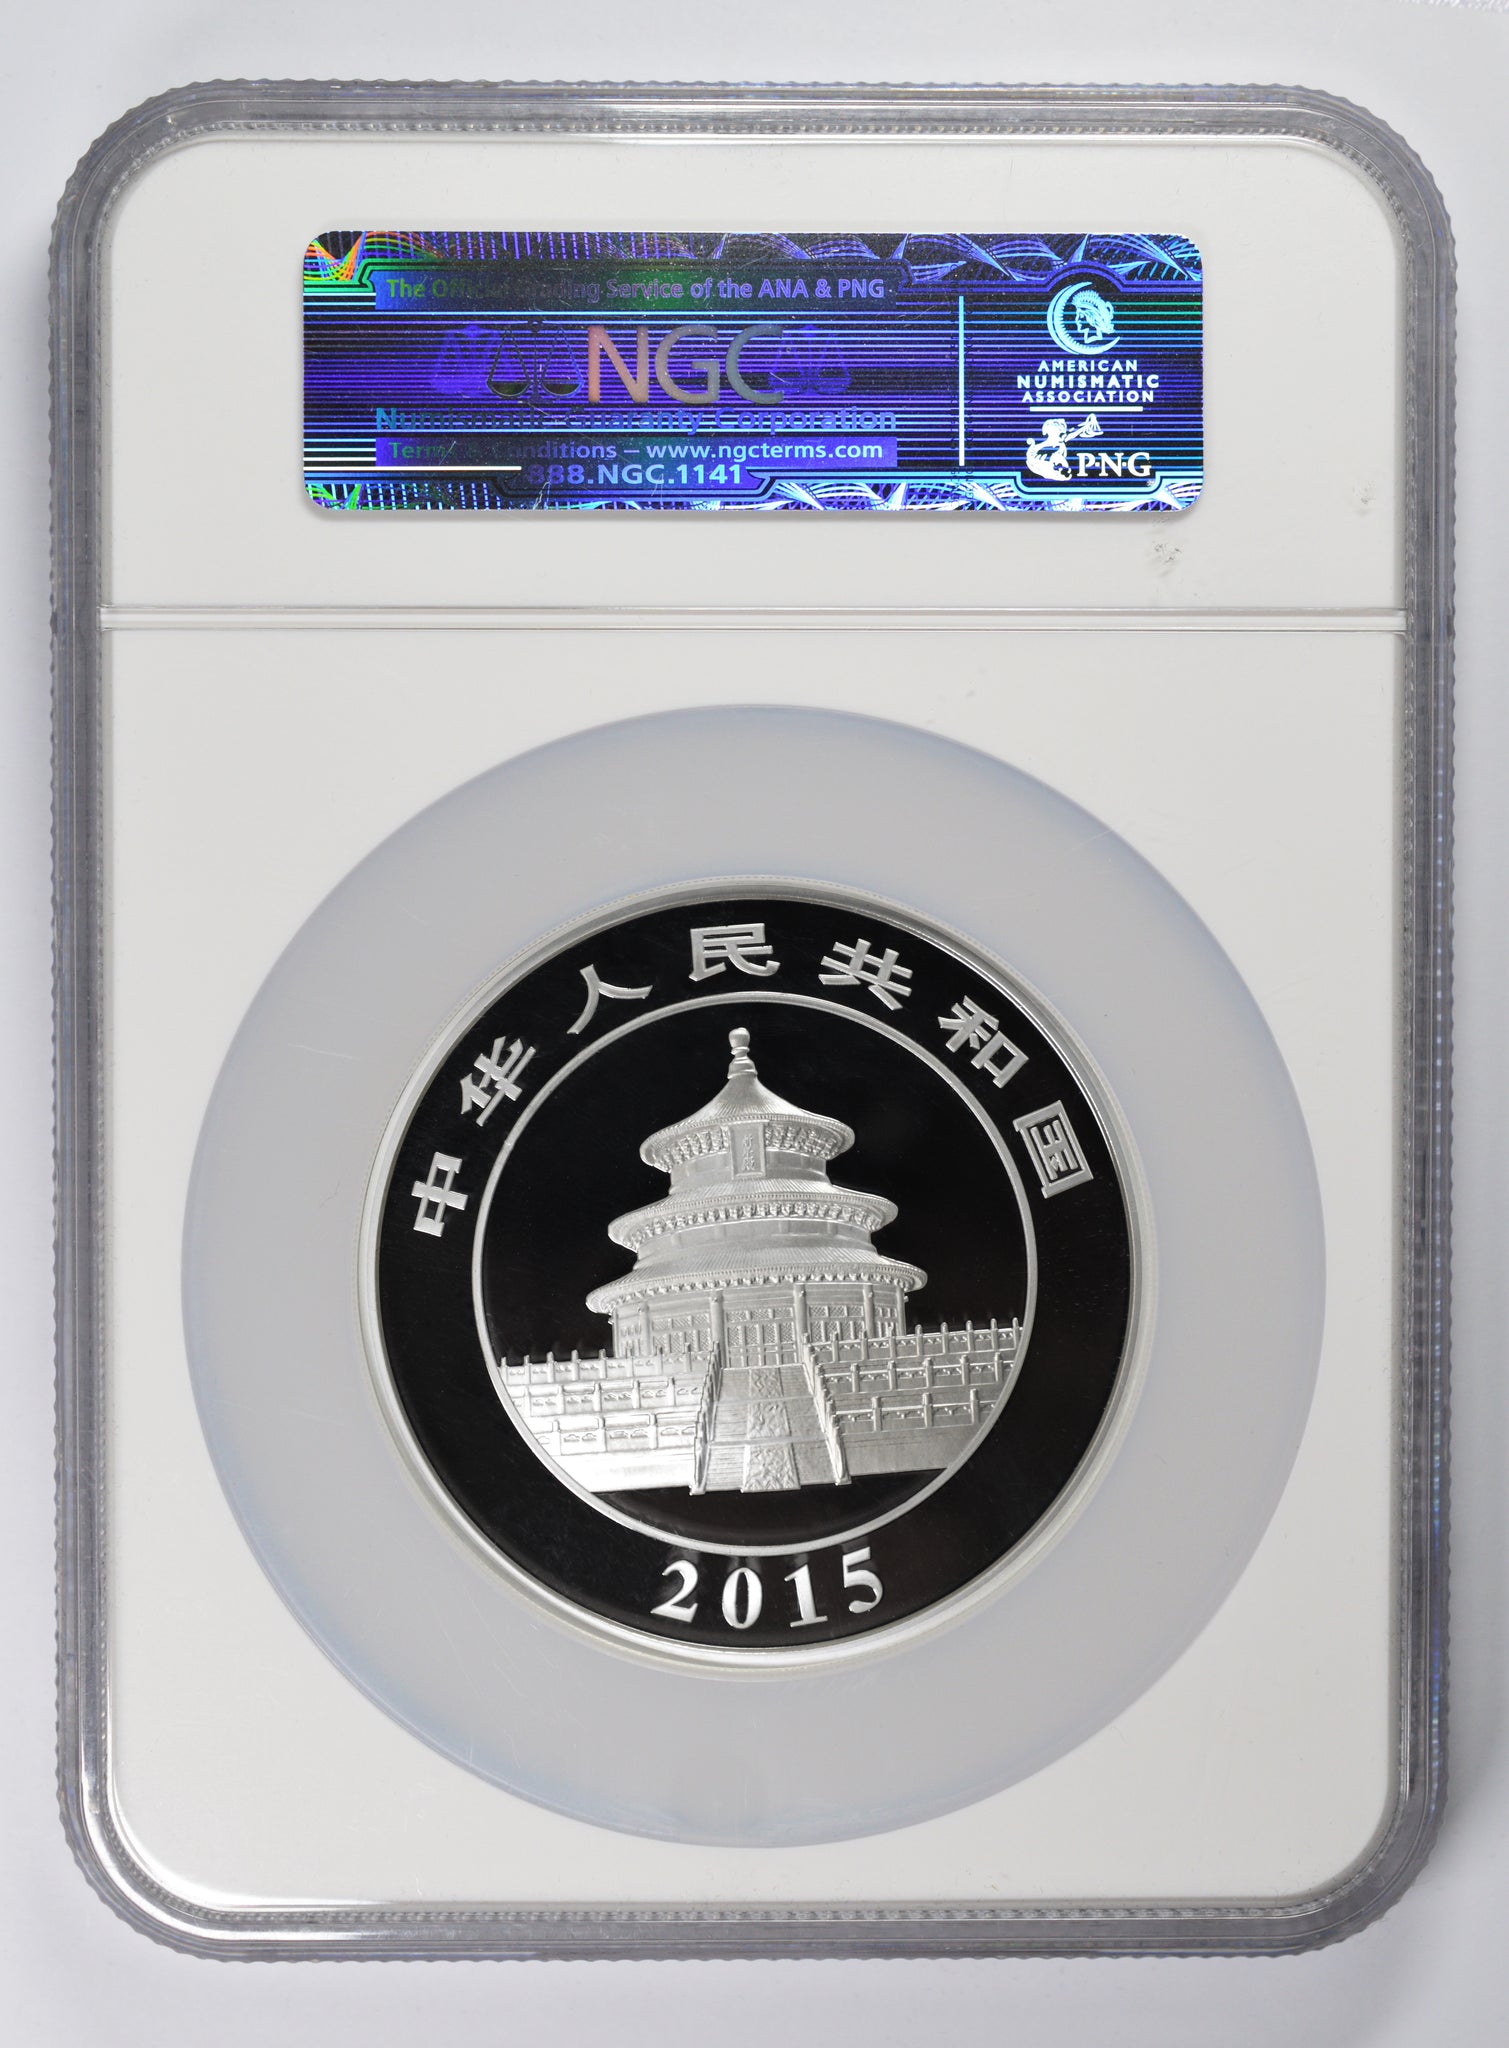 Sold at Auction: 2015 PROOF Brazil Rio Olympics Cycling Series II SILVER $5  Coin - NGC PF70 Ultra Cameo